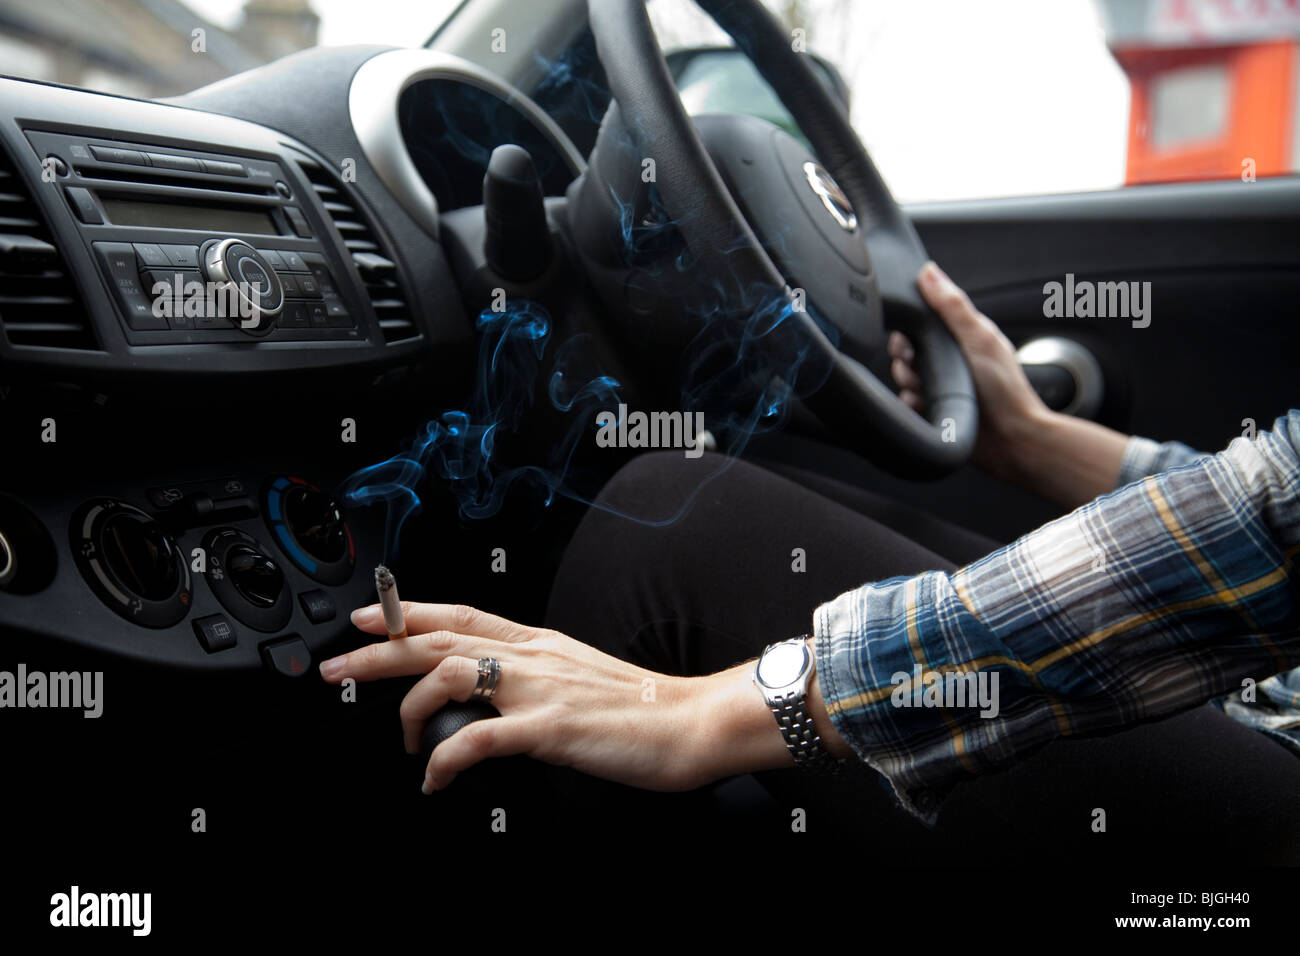 Woman smoking cigarette in car. Doctors in UK are calling for a ban of smoking in cars. Stock Photo